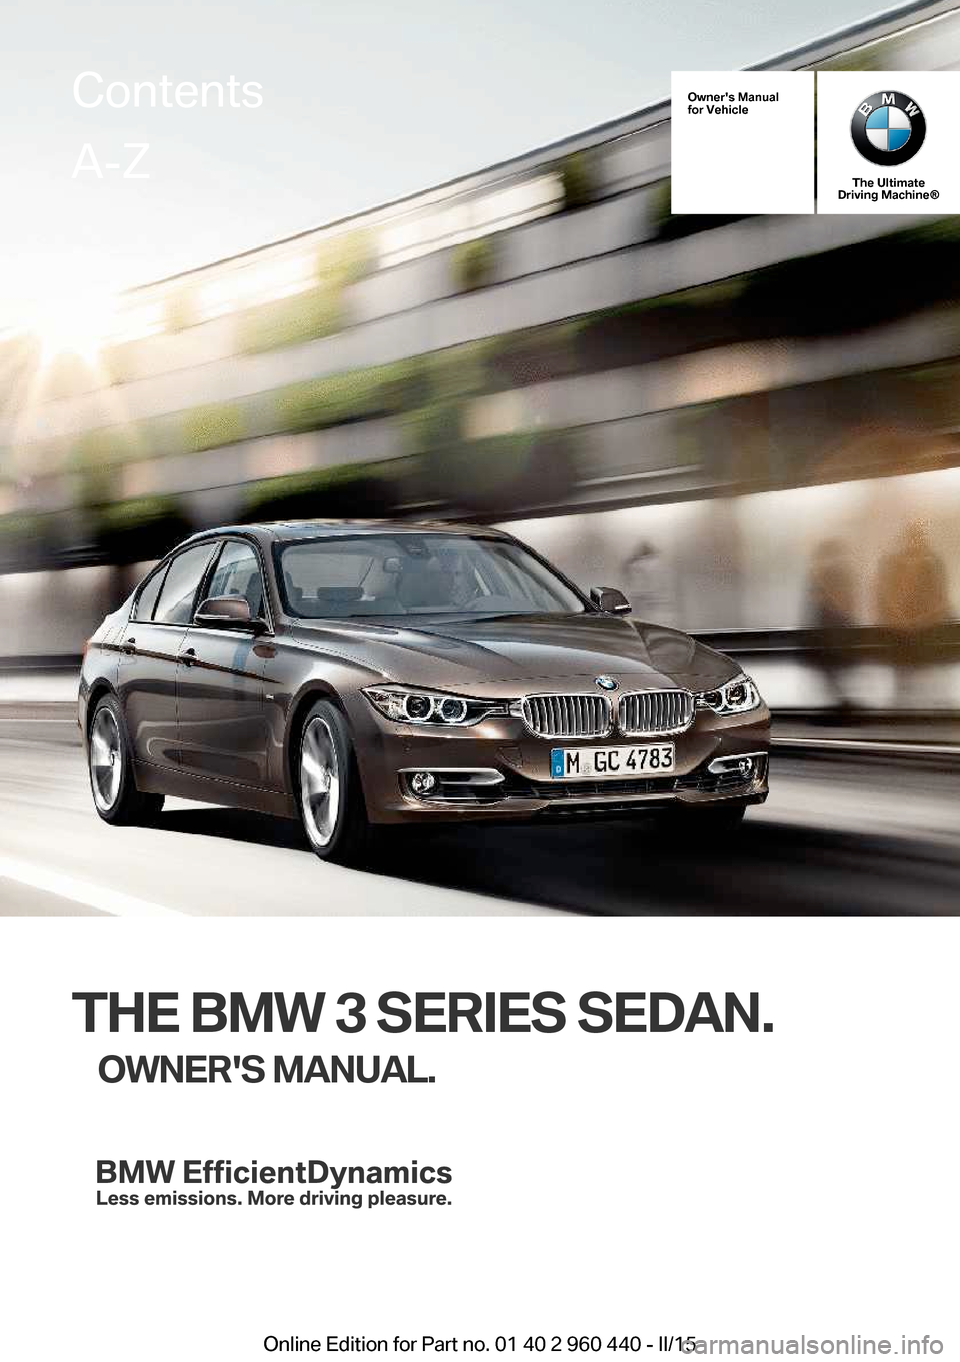 BMW 3 SERIES SEDAN 2016 F30 Owners Manual Owners Manual
for Vehicle
The Ultimate
Driving Machine®
THE BMW 3 SERIES SEDAN.
OWNERS MANUAL.
ContentsA-Z
Online Edition for Part no. 01 40 2 960 440 - II/15   